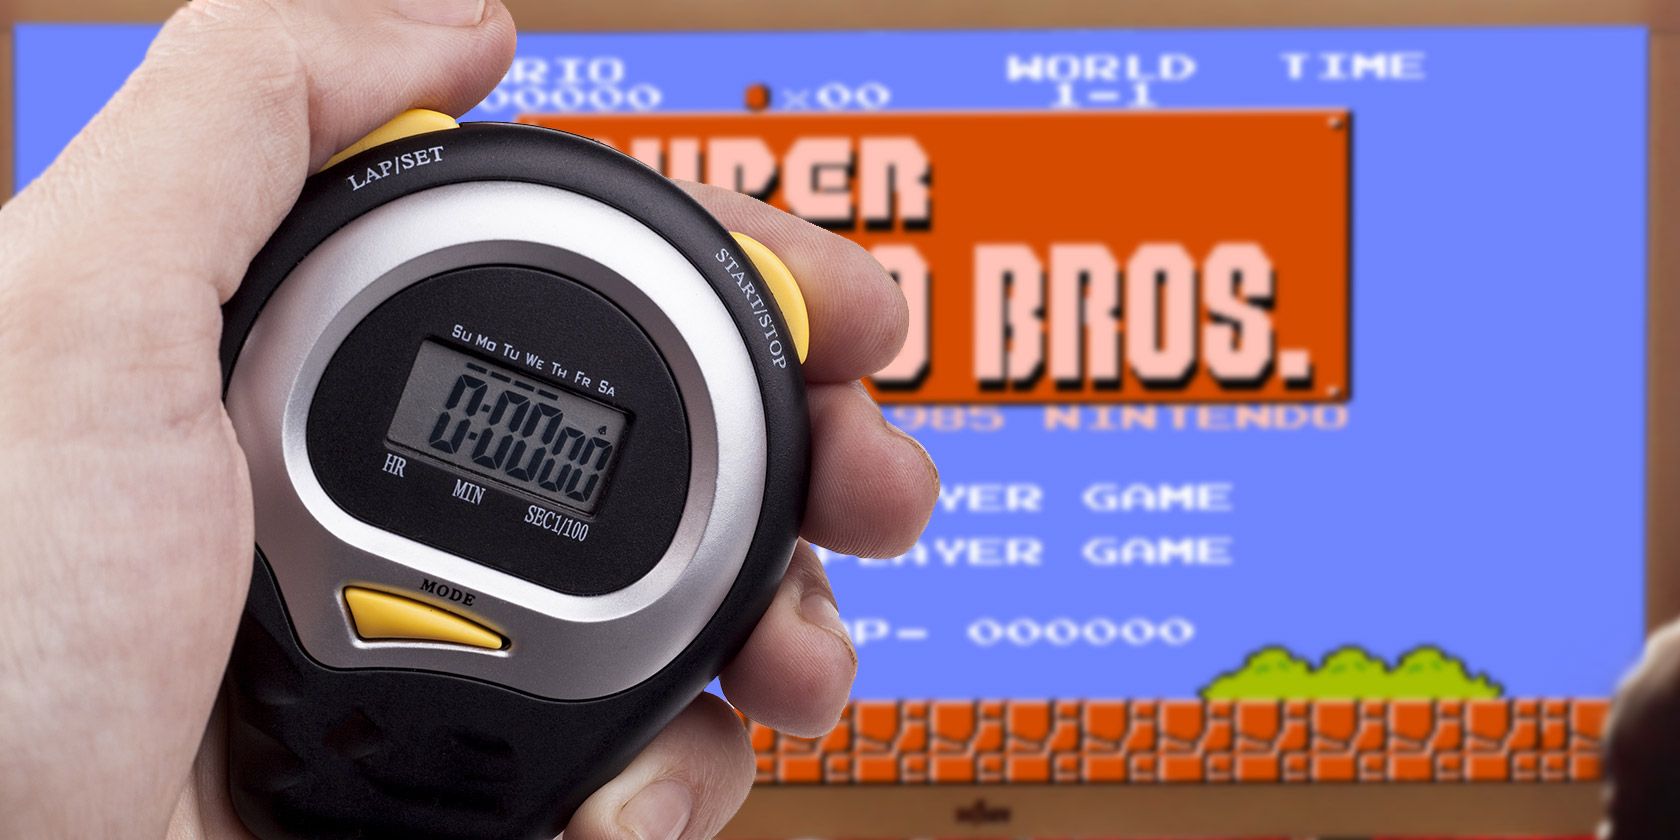 Stopwatch in front of Super Mario Bros. title screen